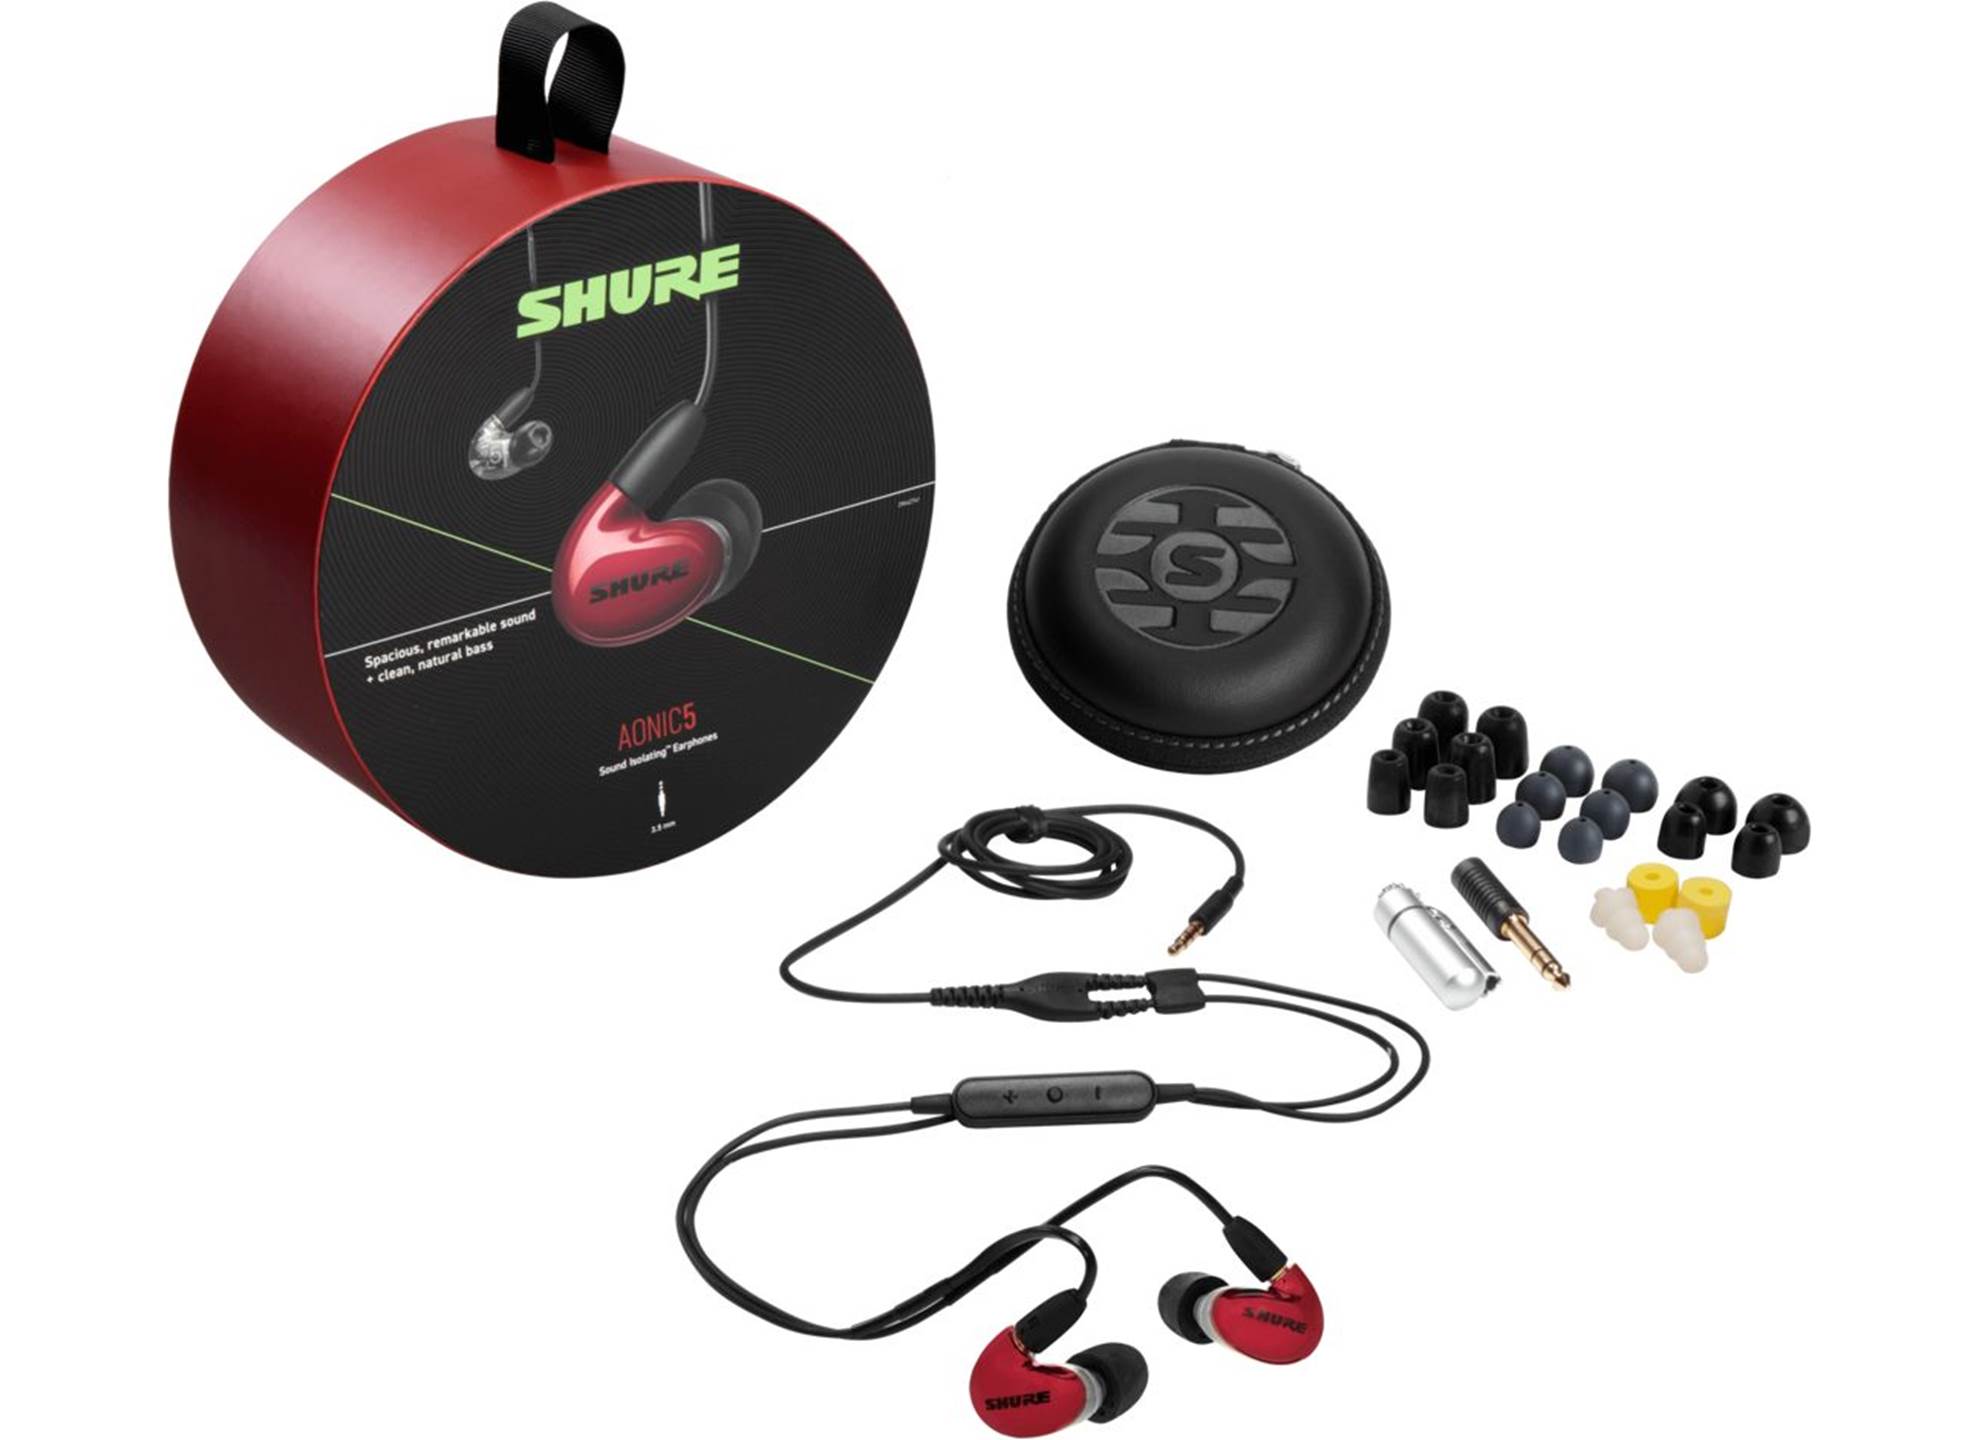 Aonic 5 3BA Earphone, Red with RMCE-UNI